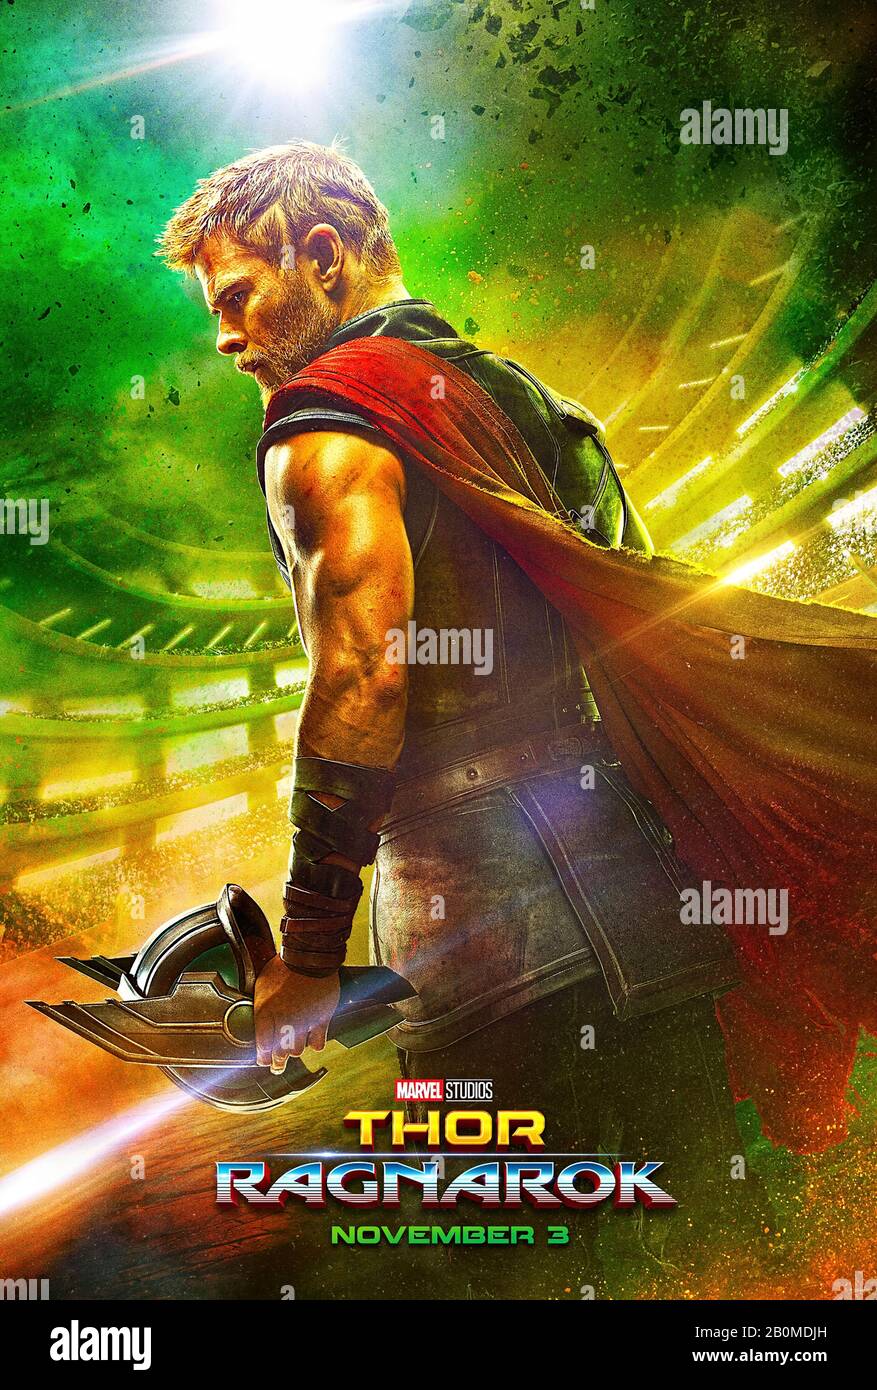 Thor: Ragnarok (2017) directed by Taika Waititi and starring Chris Hemsworth, Jeff Goldblum, Tessa Thompson and Mark Ruffalo. Thor gets stranded enroute to his homeworld on the planet Sakaar where he meets an old friend and a Valkyrie. Stock Photo